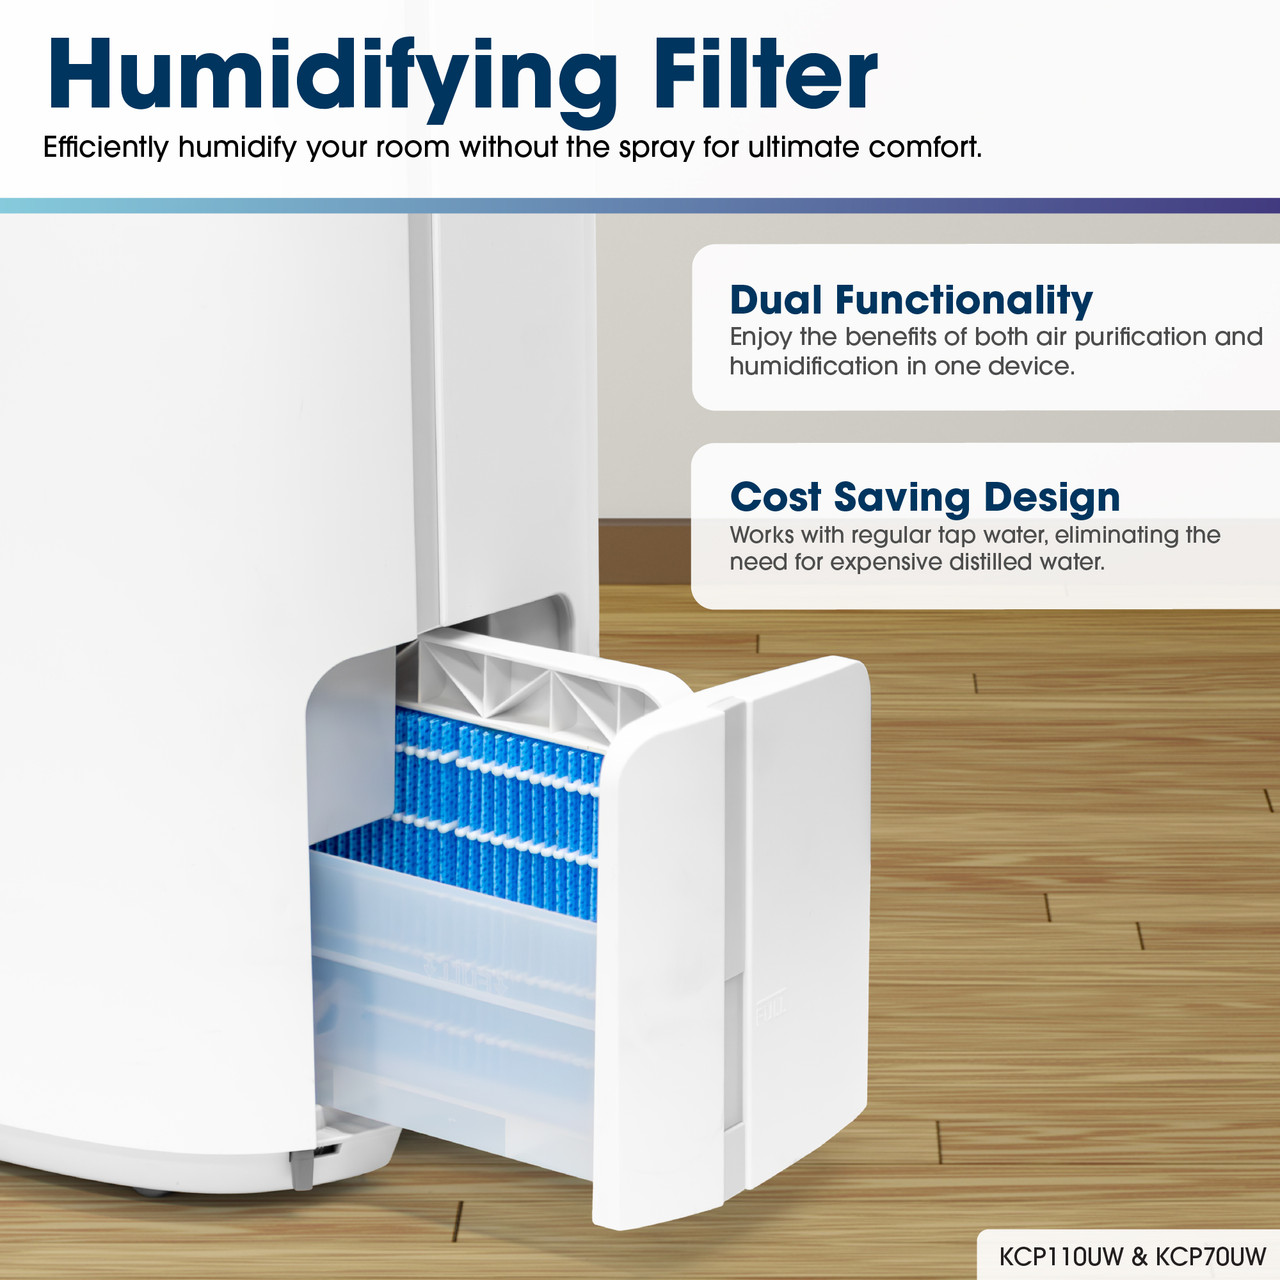 Humidifying Filter
Efficiently humidify your room without the spray for ultimate comfort.
Dual Functionality
Enjoy the benefits of both air purification and humidification in one device.
Cost Saving Design
Works with regular tap water, eliminating the need for expensive distilled water.
KCP70UW